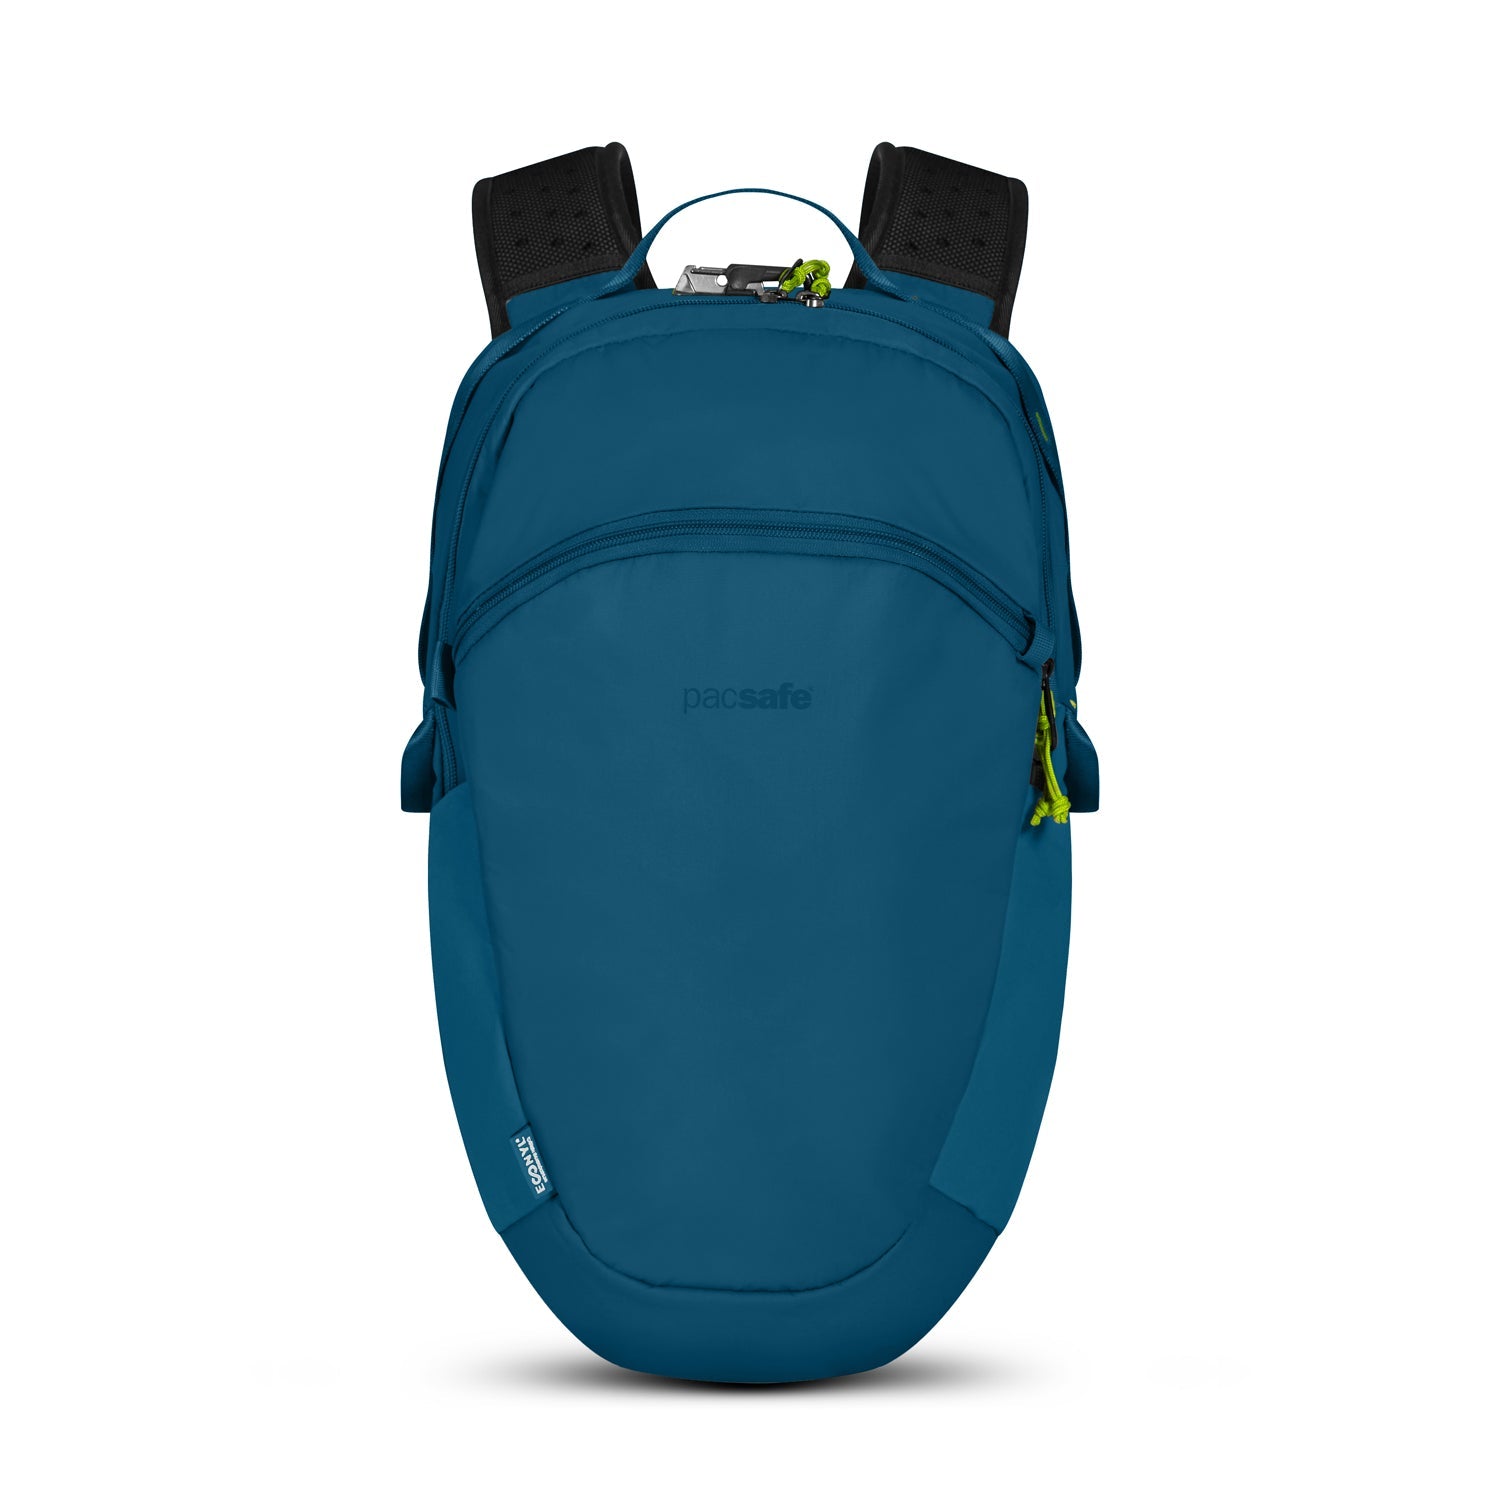 Pacsafe - Anti-Theft technology - Backpacks and Bags - Pacsafe